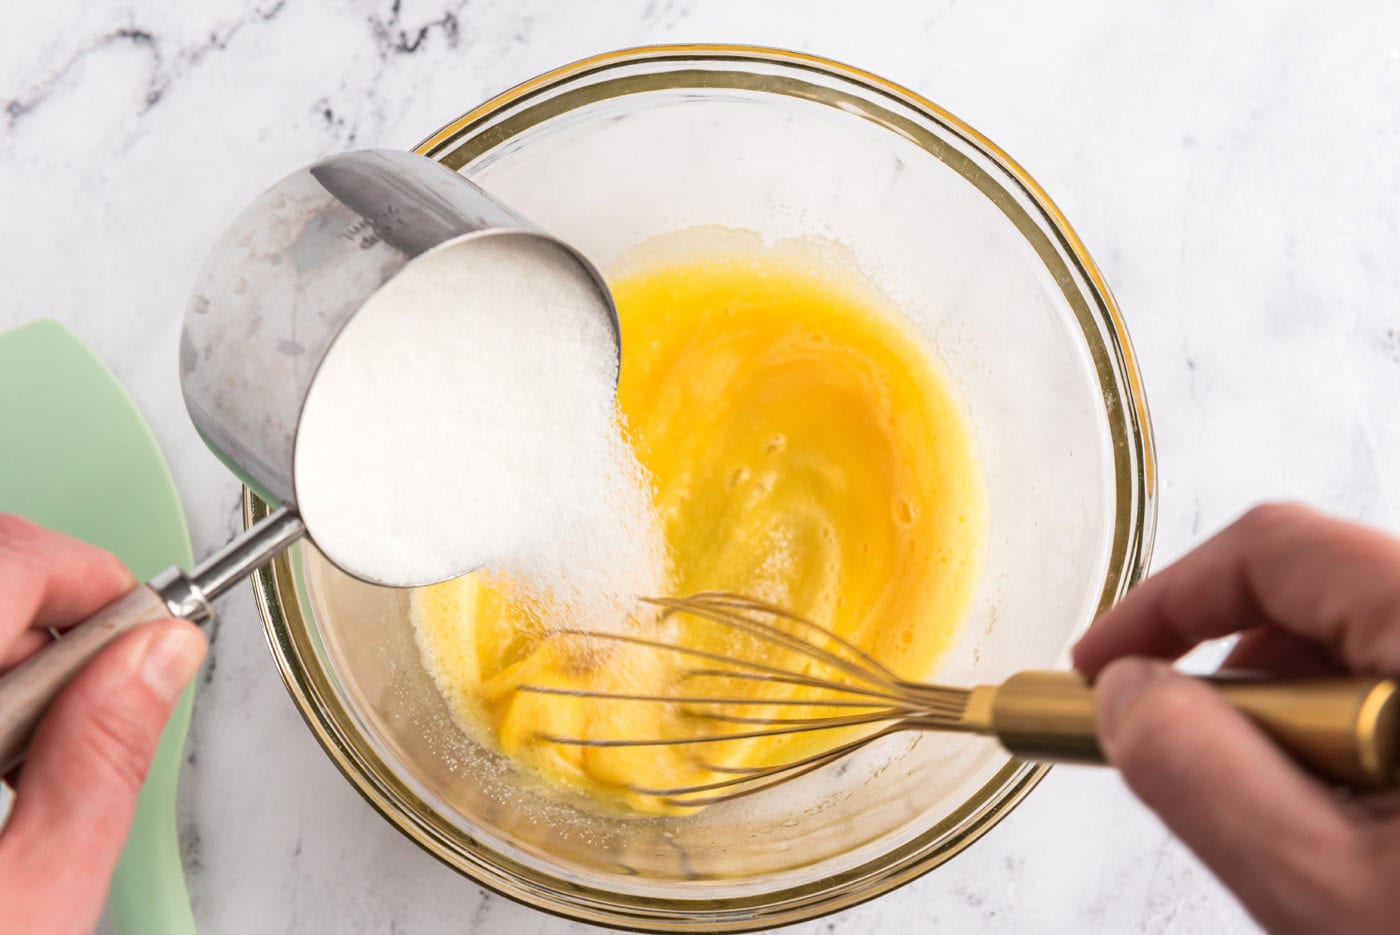 whisking sugar into eggs in a bowl